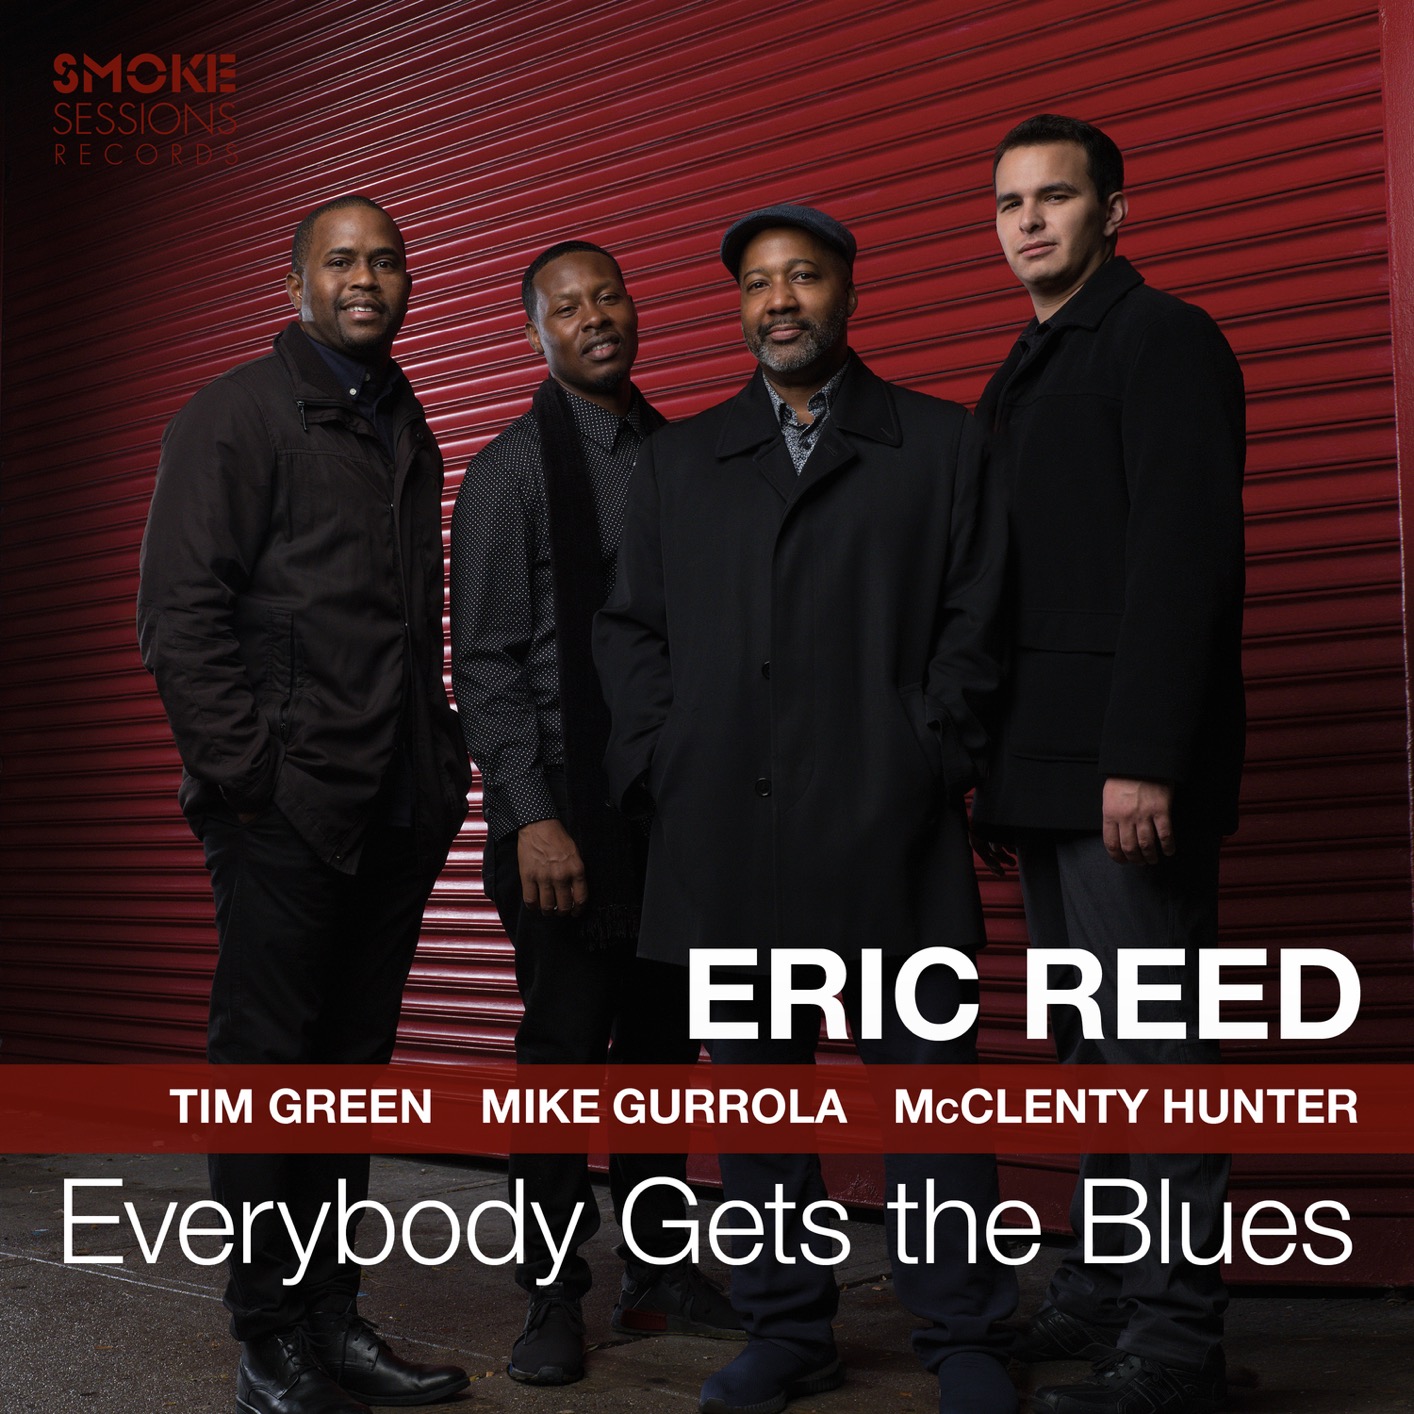 Eric Reed - Everybody Gets the Blues (2019) [FLAC 24bit/96kHz]